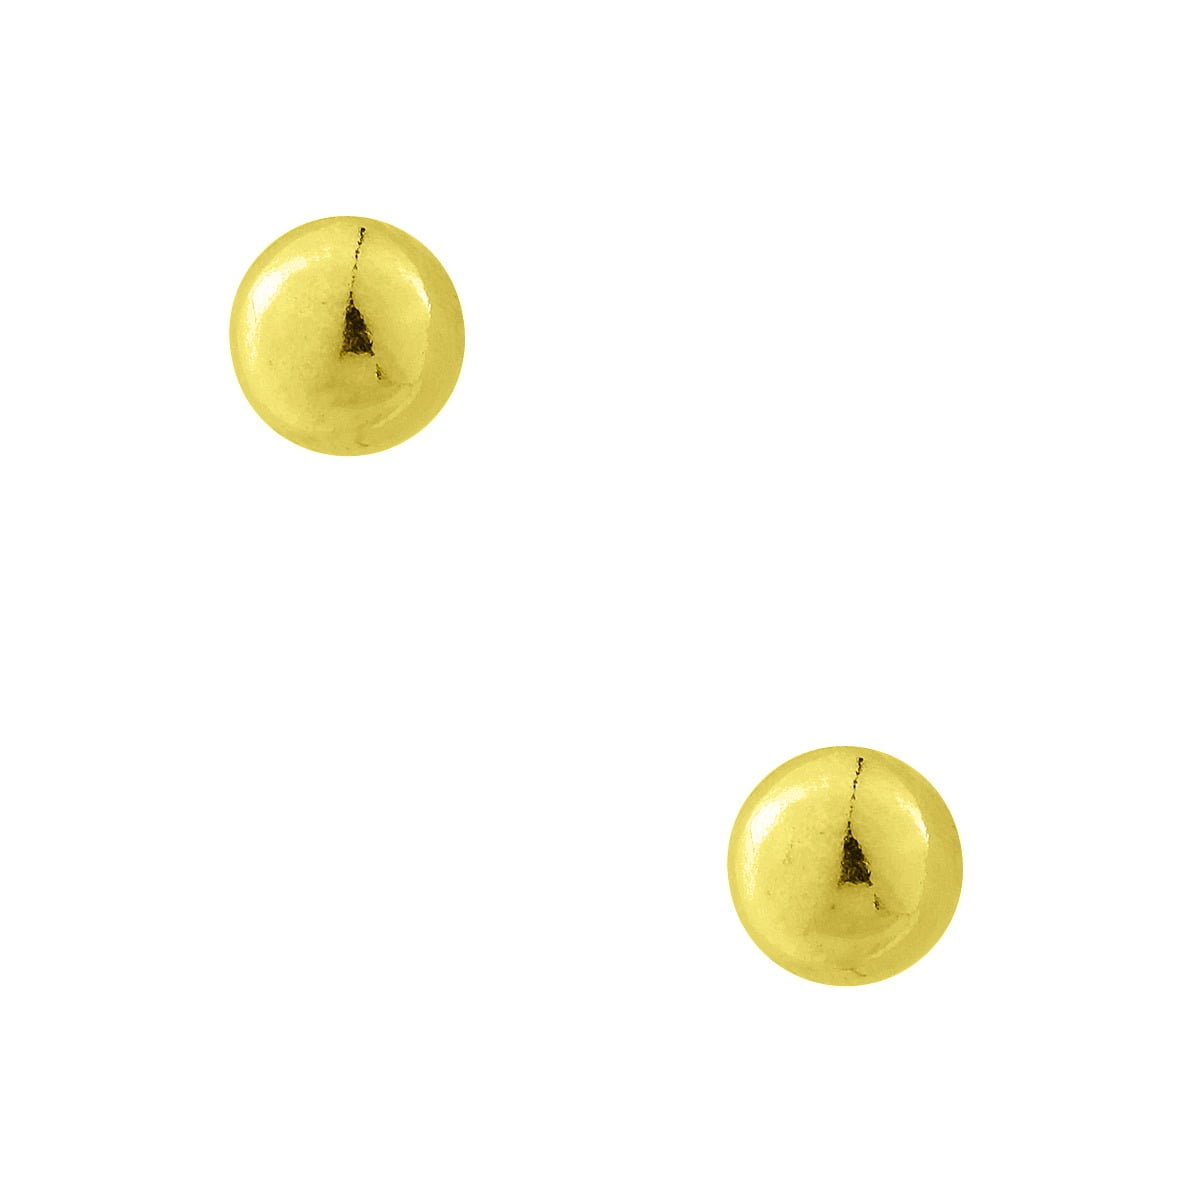 Ball earrings with patent surface, diameter 5 mm, made of gold plated silver 925° with pin clasp.